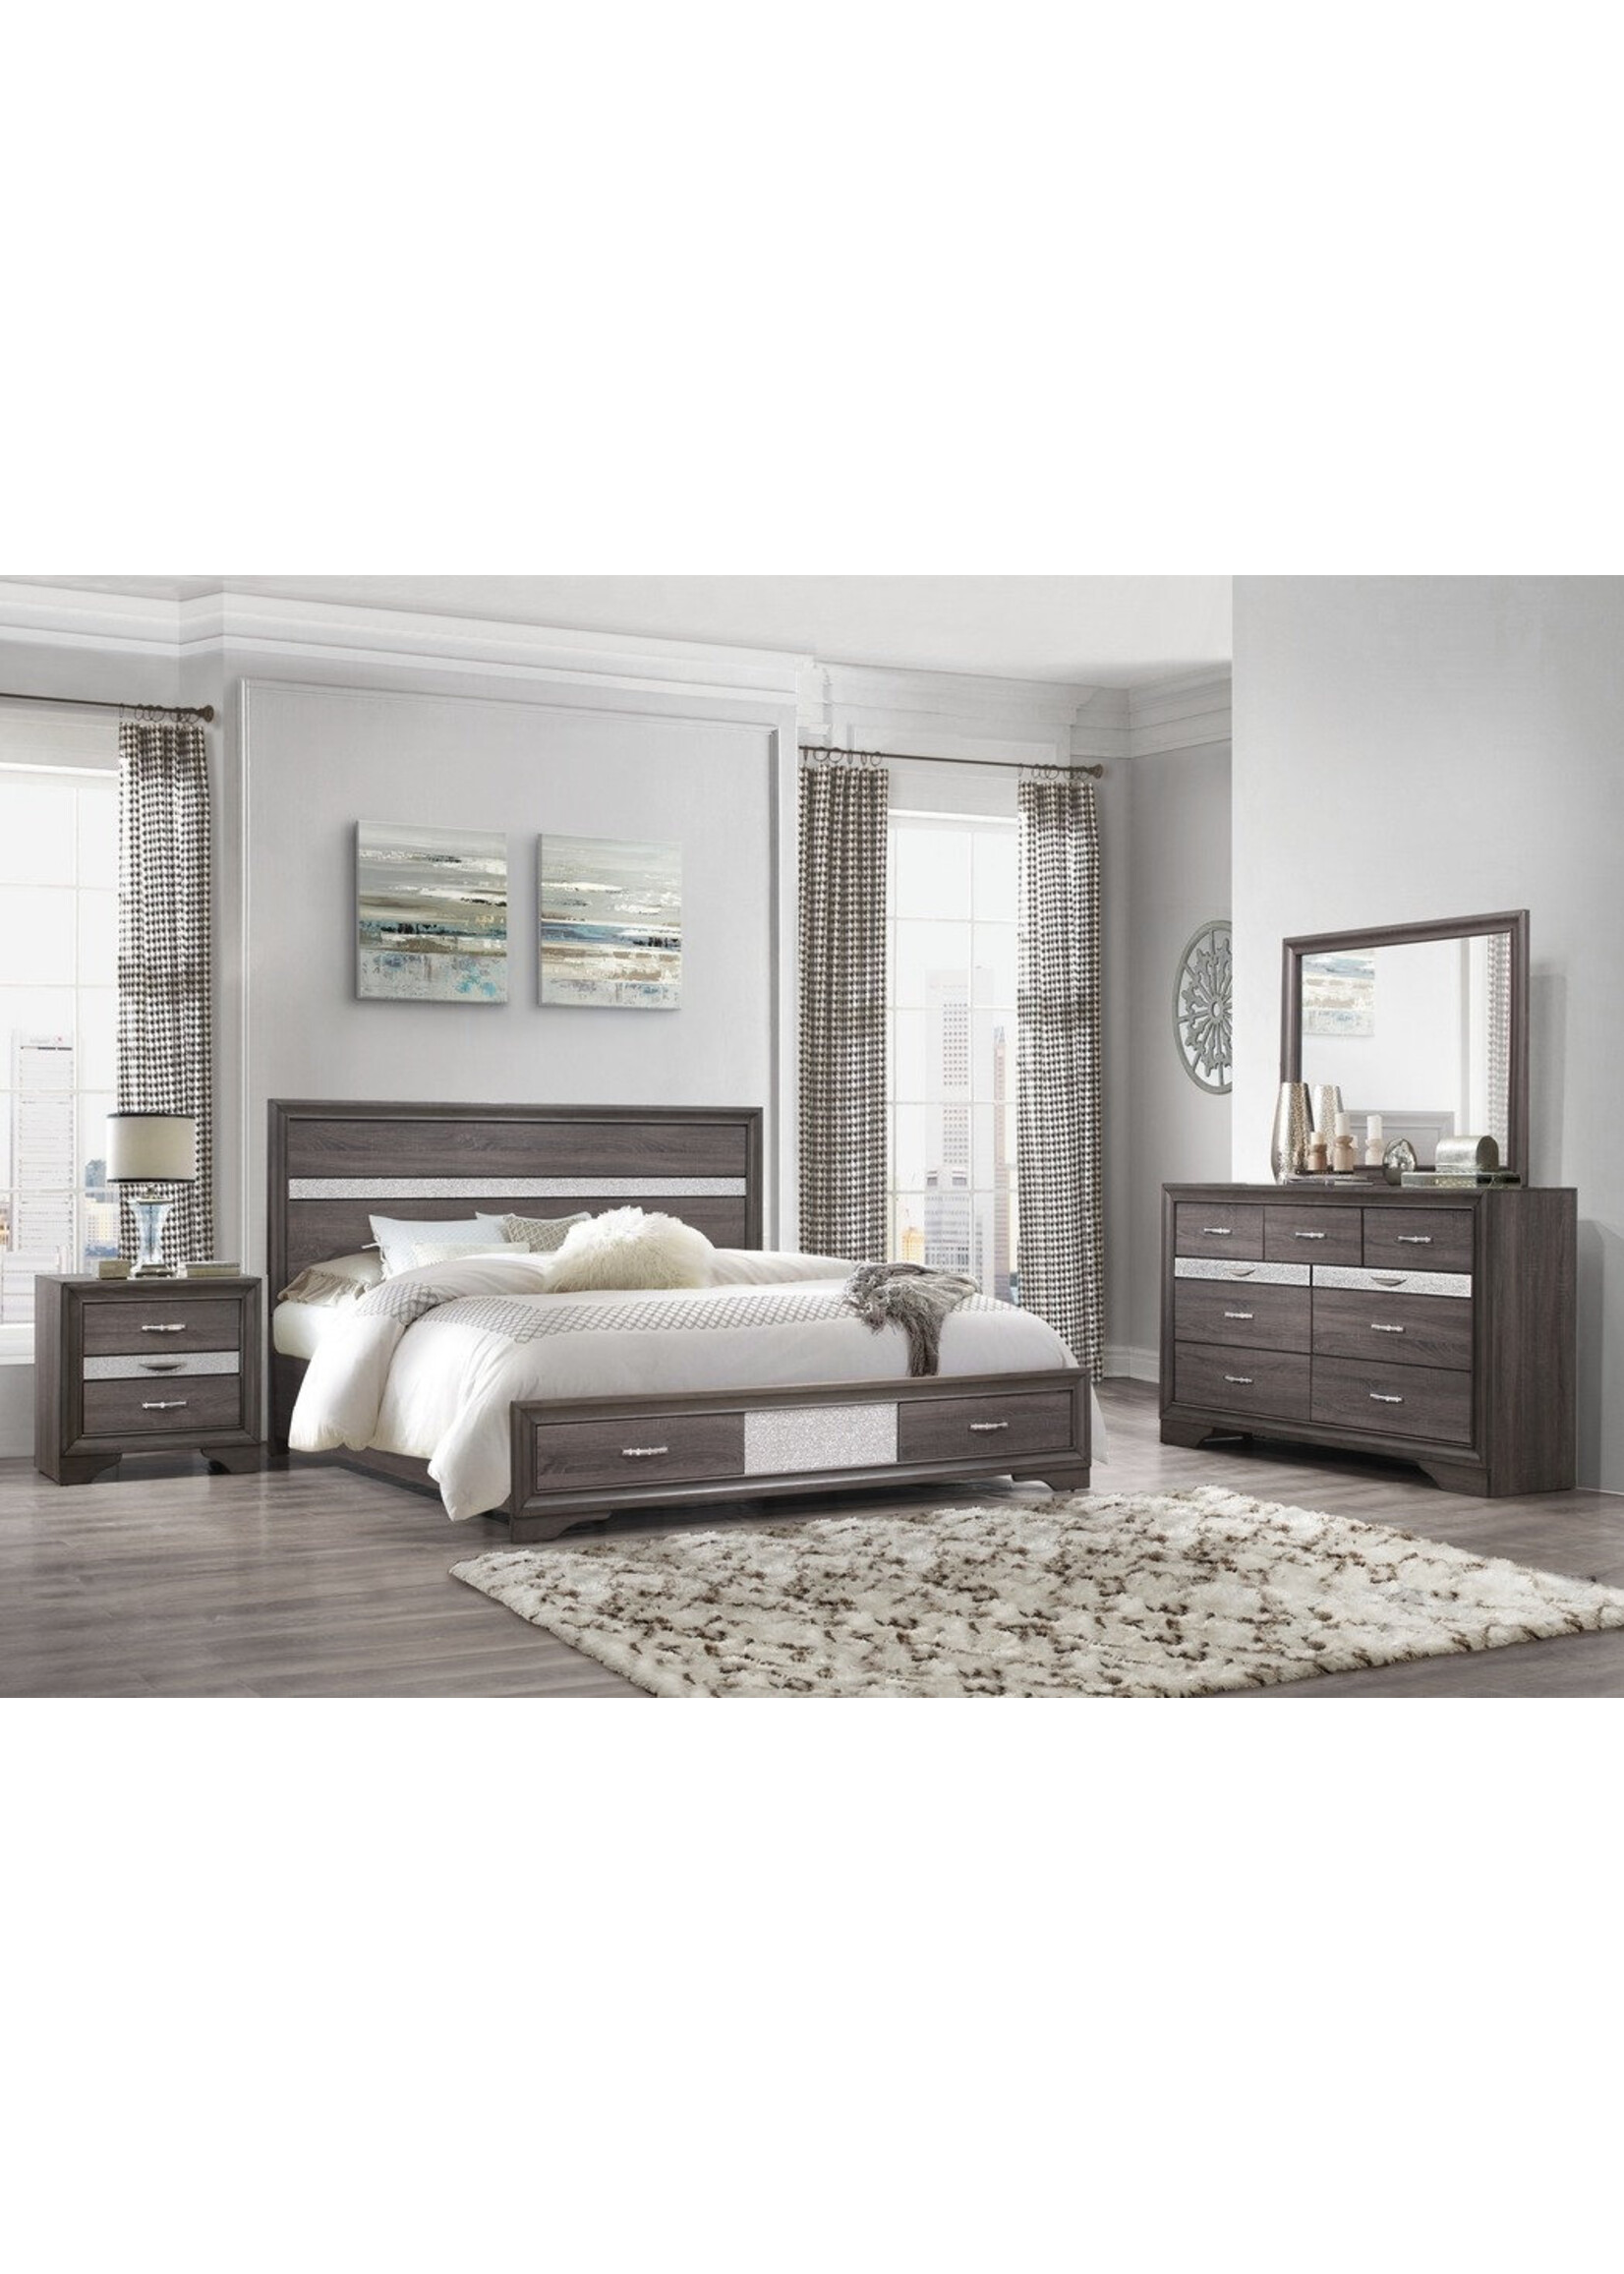 Harper Bed Frame with Drawers